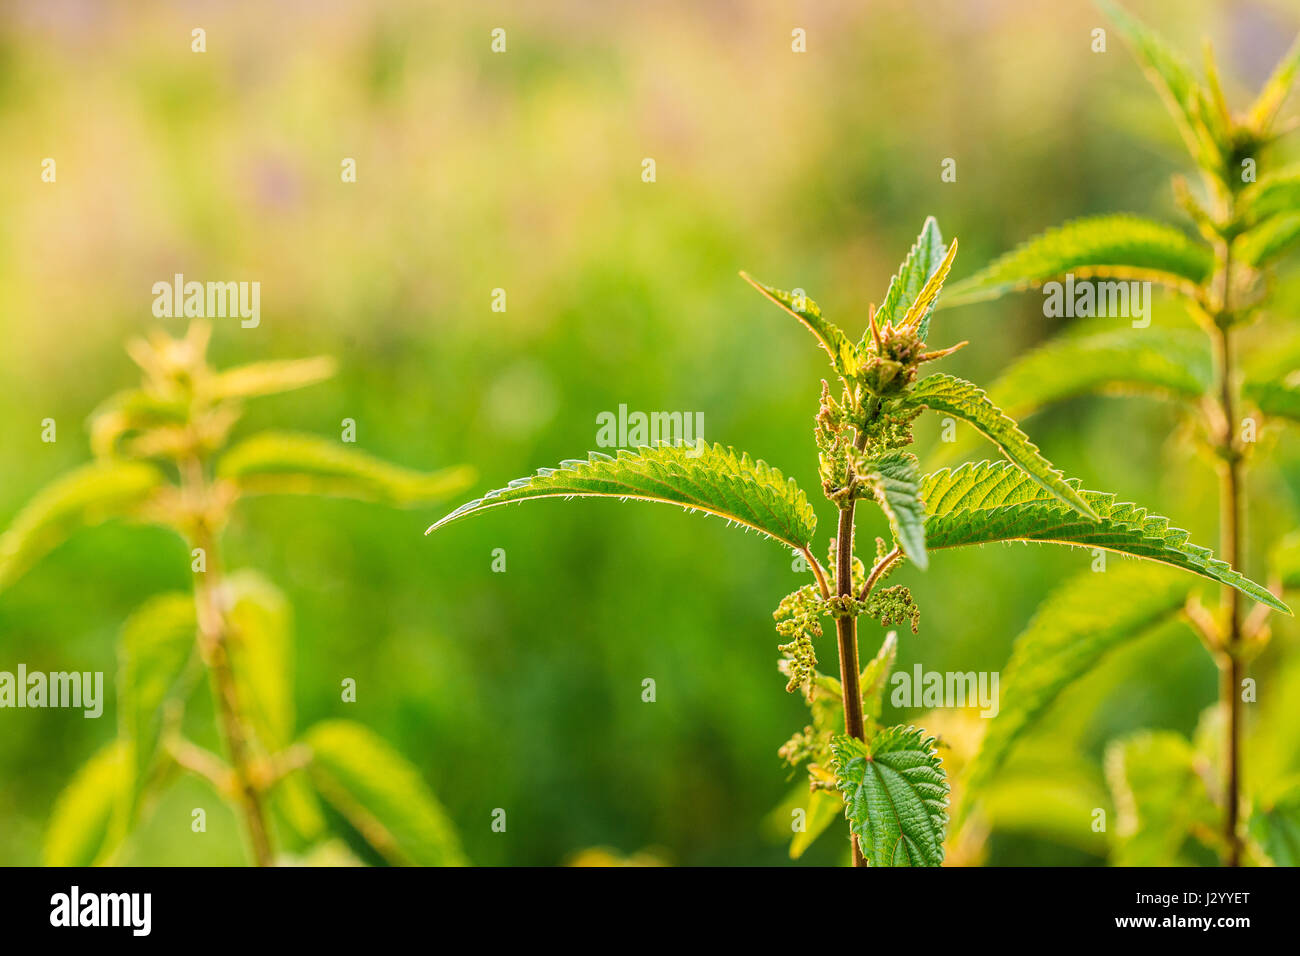 The Twig Of Wild Plant Nettle Or Stinging Nettle Or Urtica Dioica In Summer Spring Field At Sunset Sunrise. Close Up, Detail, At Green Background, Cop Stock Photo